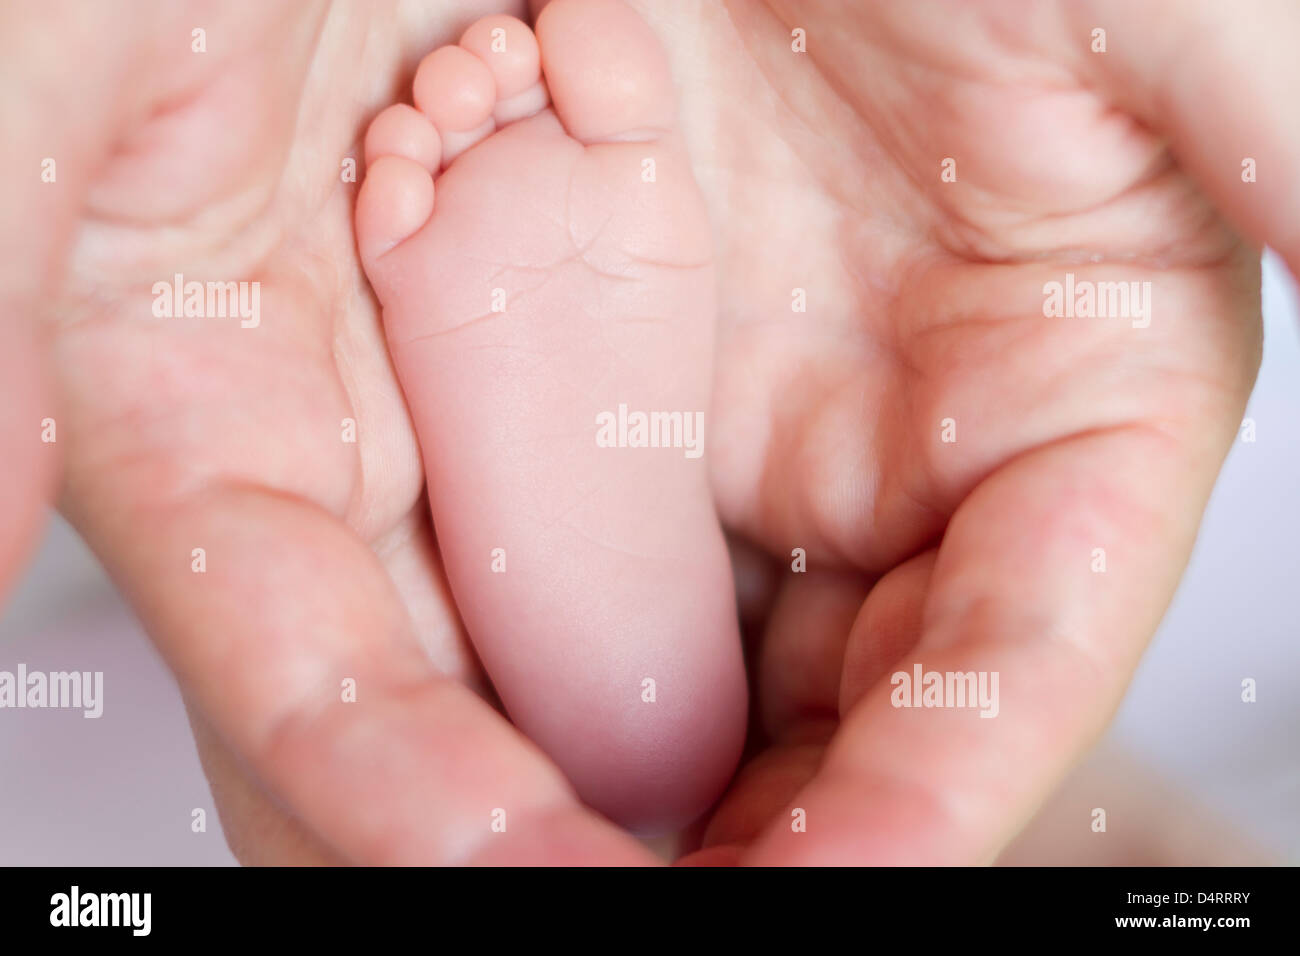 8 days old girl's feet in her mother's hands, very tiny toes with shallow depth of field. Horizontal. Stock Photo